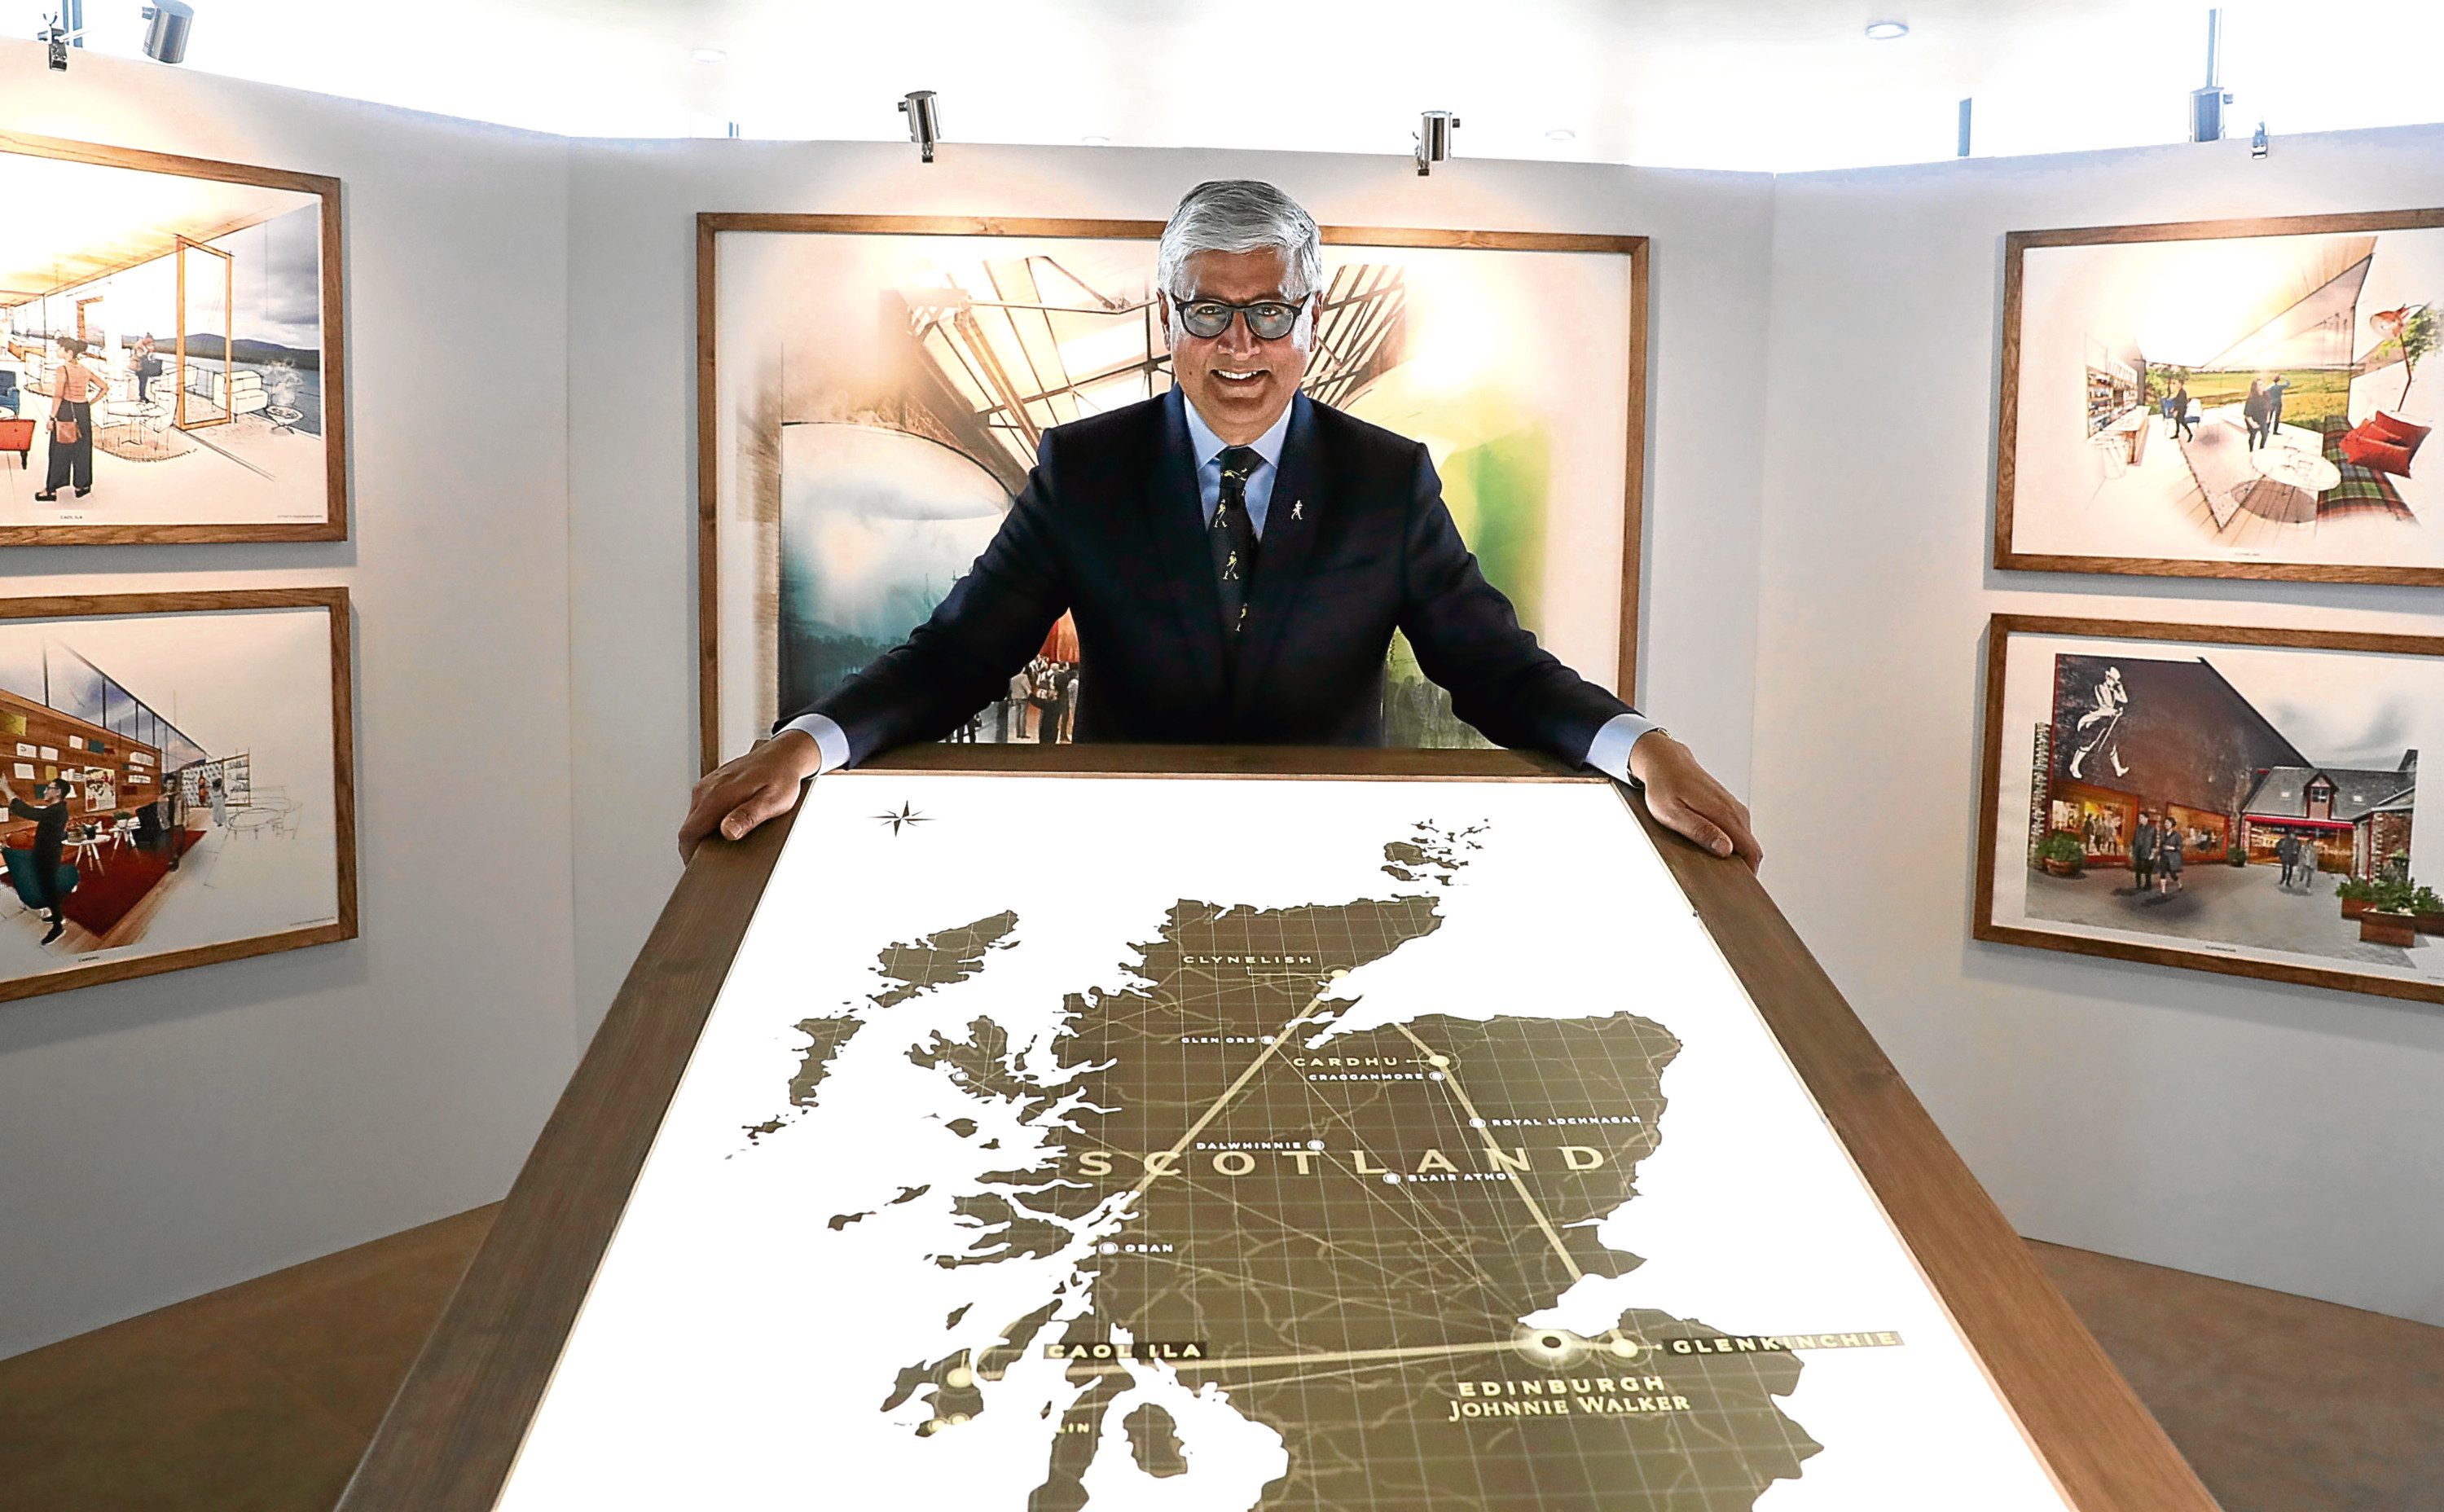 Ivan Menezes, chief executive of Diageo at their headquarters in Edinburgh where he announced a £150 million investment over three years to "transform" its Scotch whisky visitor experiences. PRESS ASSOCIATION Photo. Picture date: Monday April 16, 2018. See PA story INDUSTRY Diageo. Photo credit should read: Andrew Milligan/PA Wire